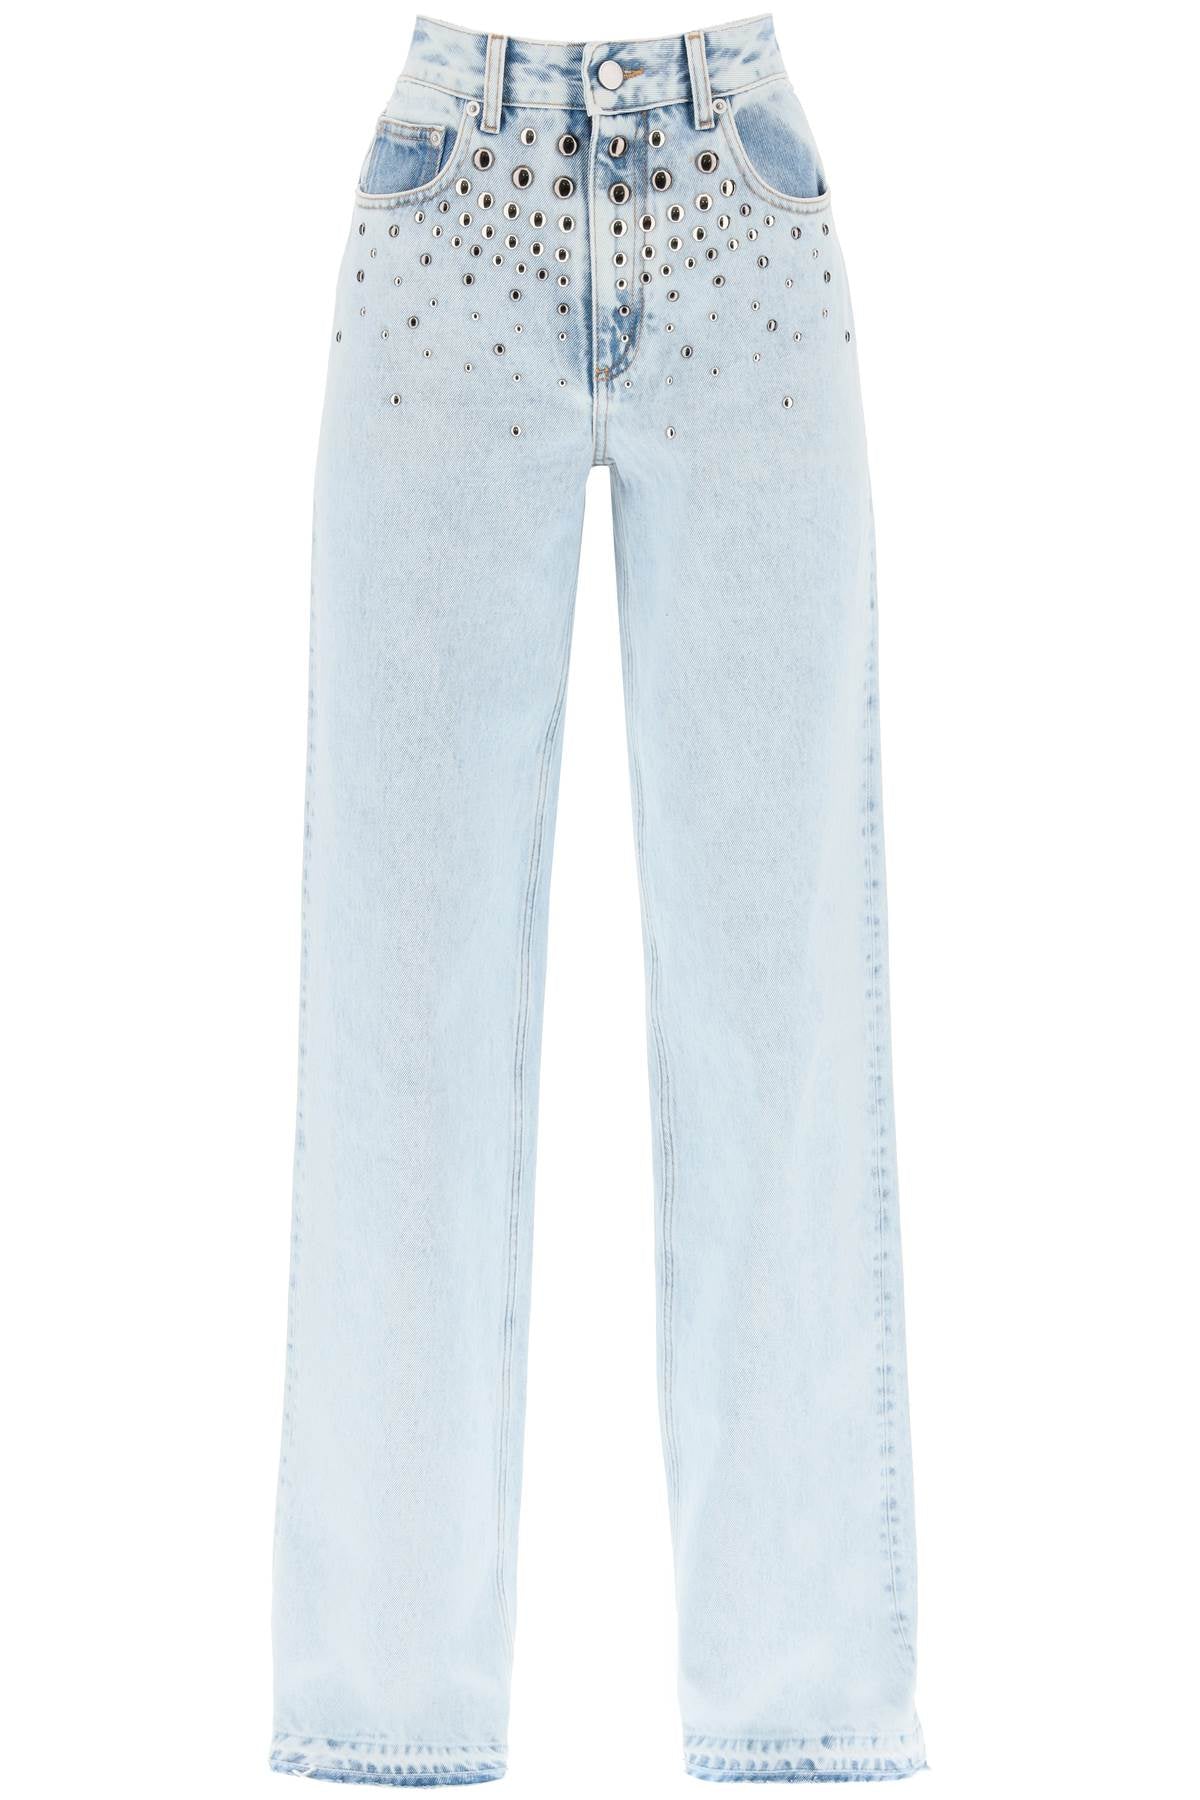 Alessandra rich jeans with studs FABX3647 F4256 LIGHT BLUE